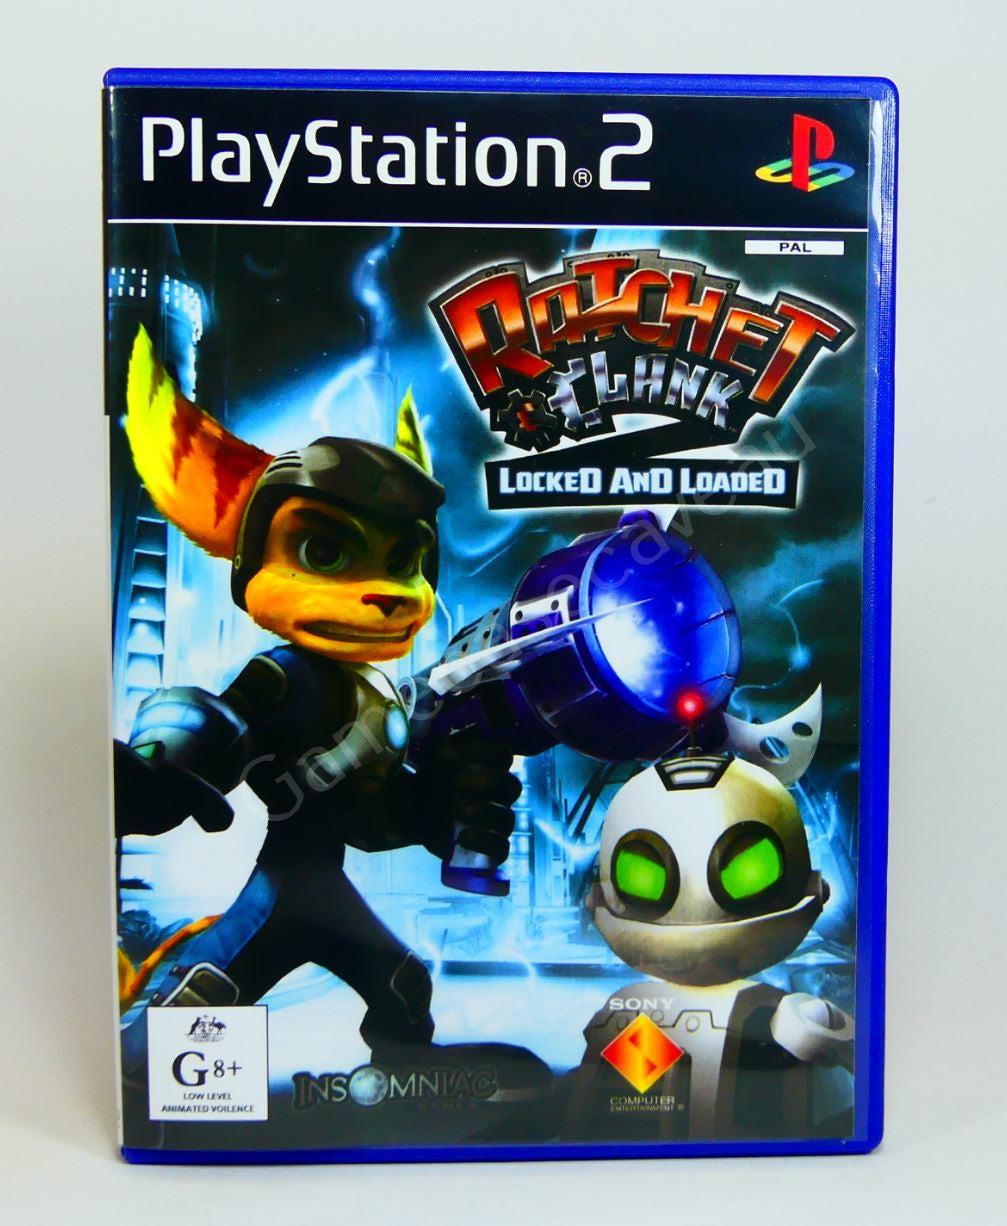 Ratchet & Clank Locked and Loaded - PS2 Replacement Case